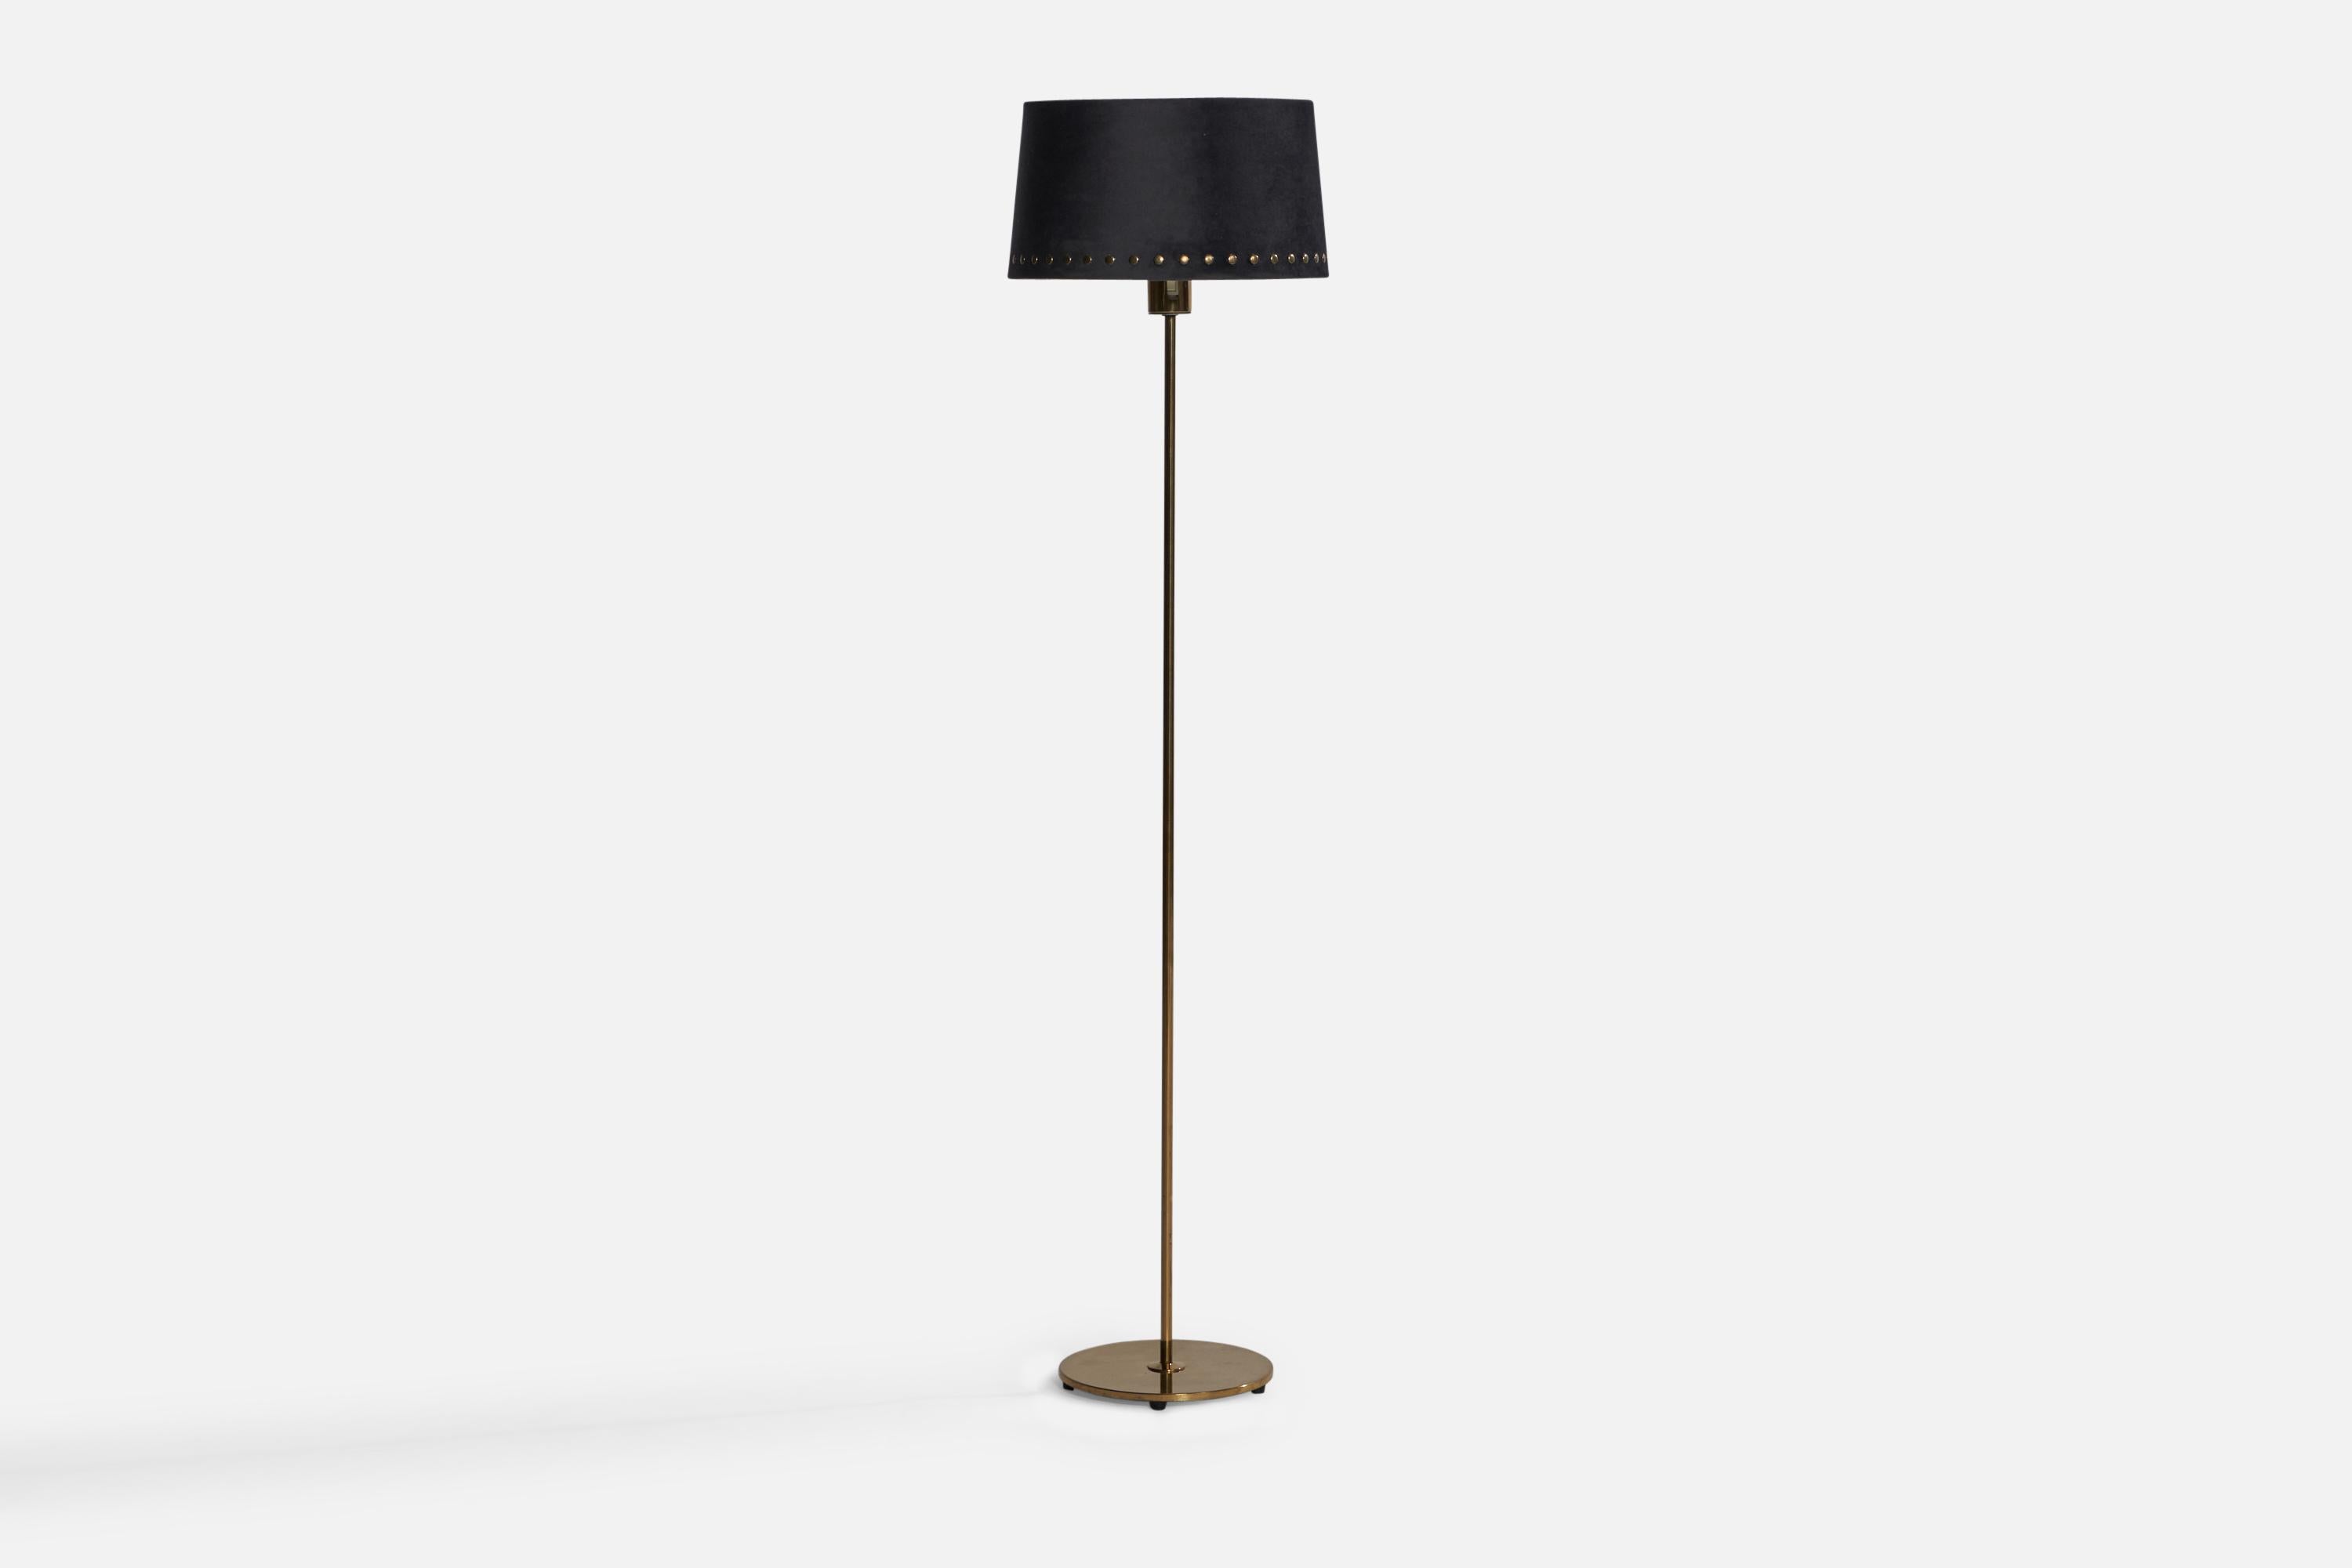 A brass and black fabric floor lamp designed and produced in Sweden, c. 1950s.

Overall Dimensions (inches): 53.8” H x 13.1” Diameter. Stated dimensions include shade.

Bulb Specifications: E-26 Bulb
Number of Sockets: 1

All lighting will be